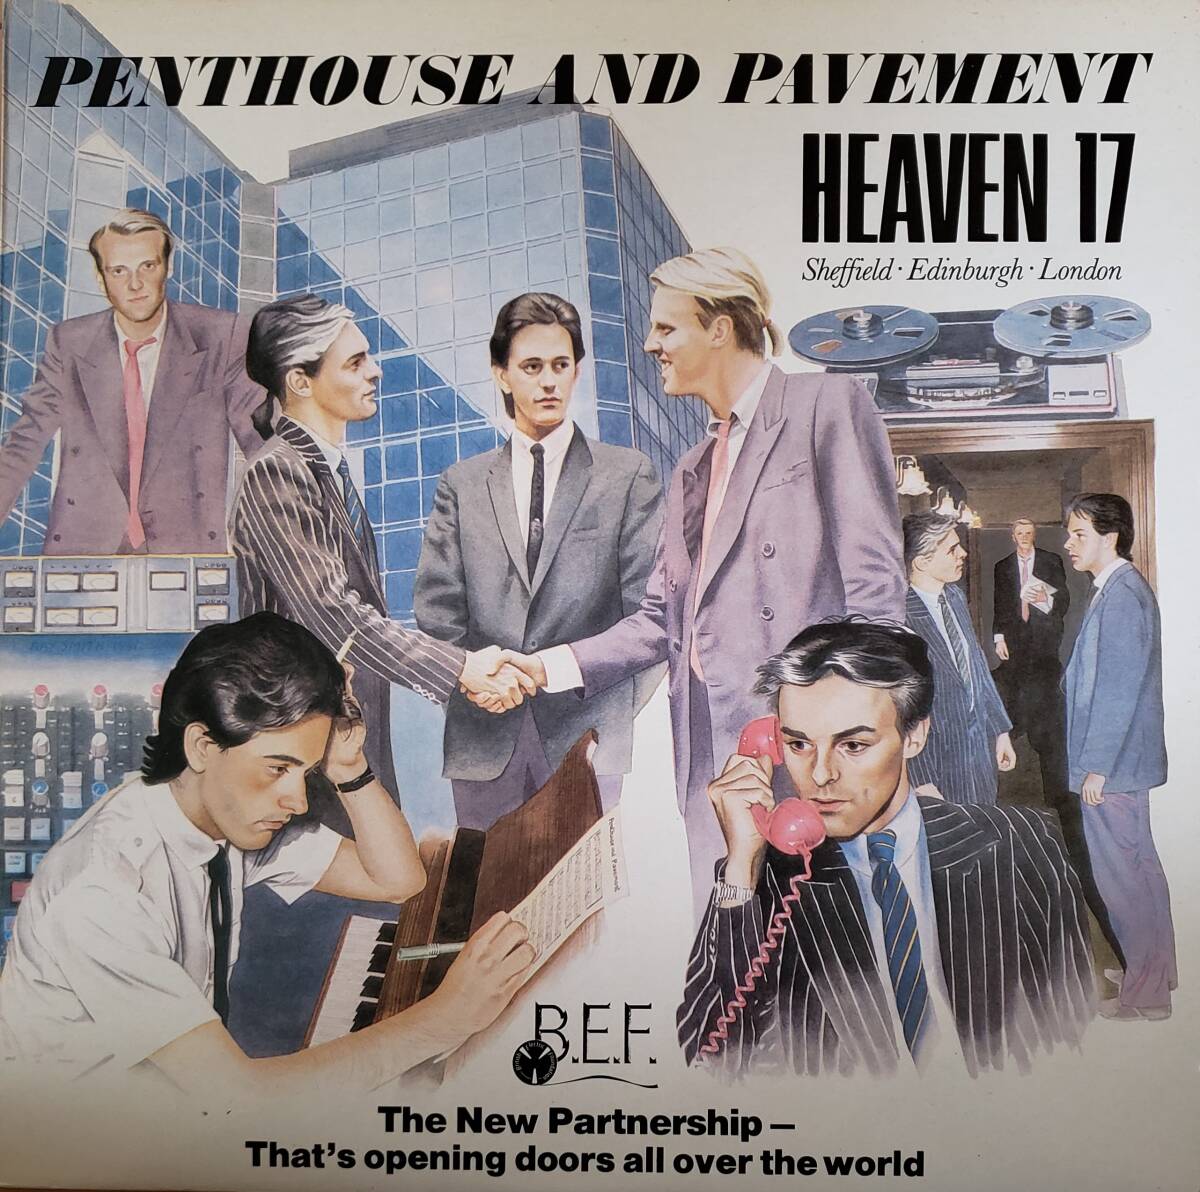 12inch UK盤 HEAVEN 17 ■ PENTHOUSE AND PAVEMENT ■ _画像1